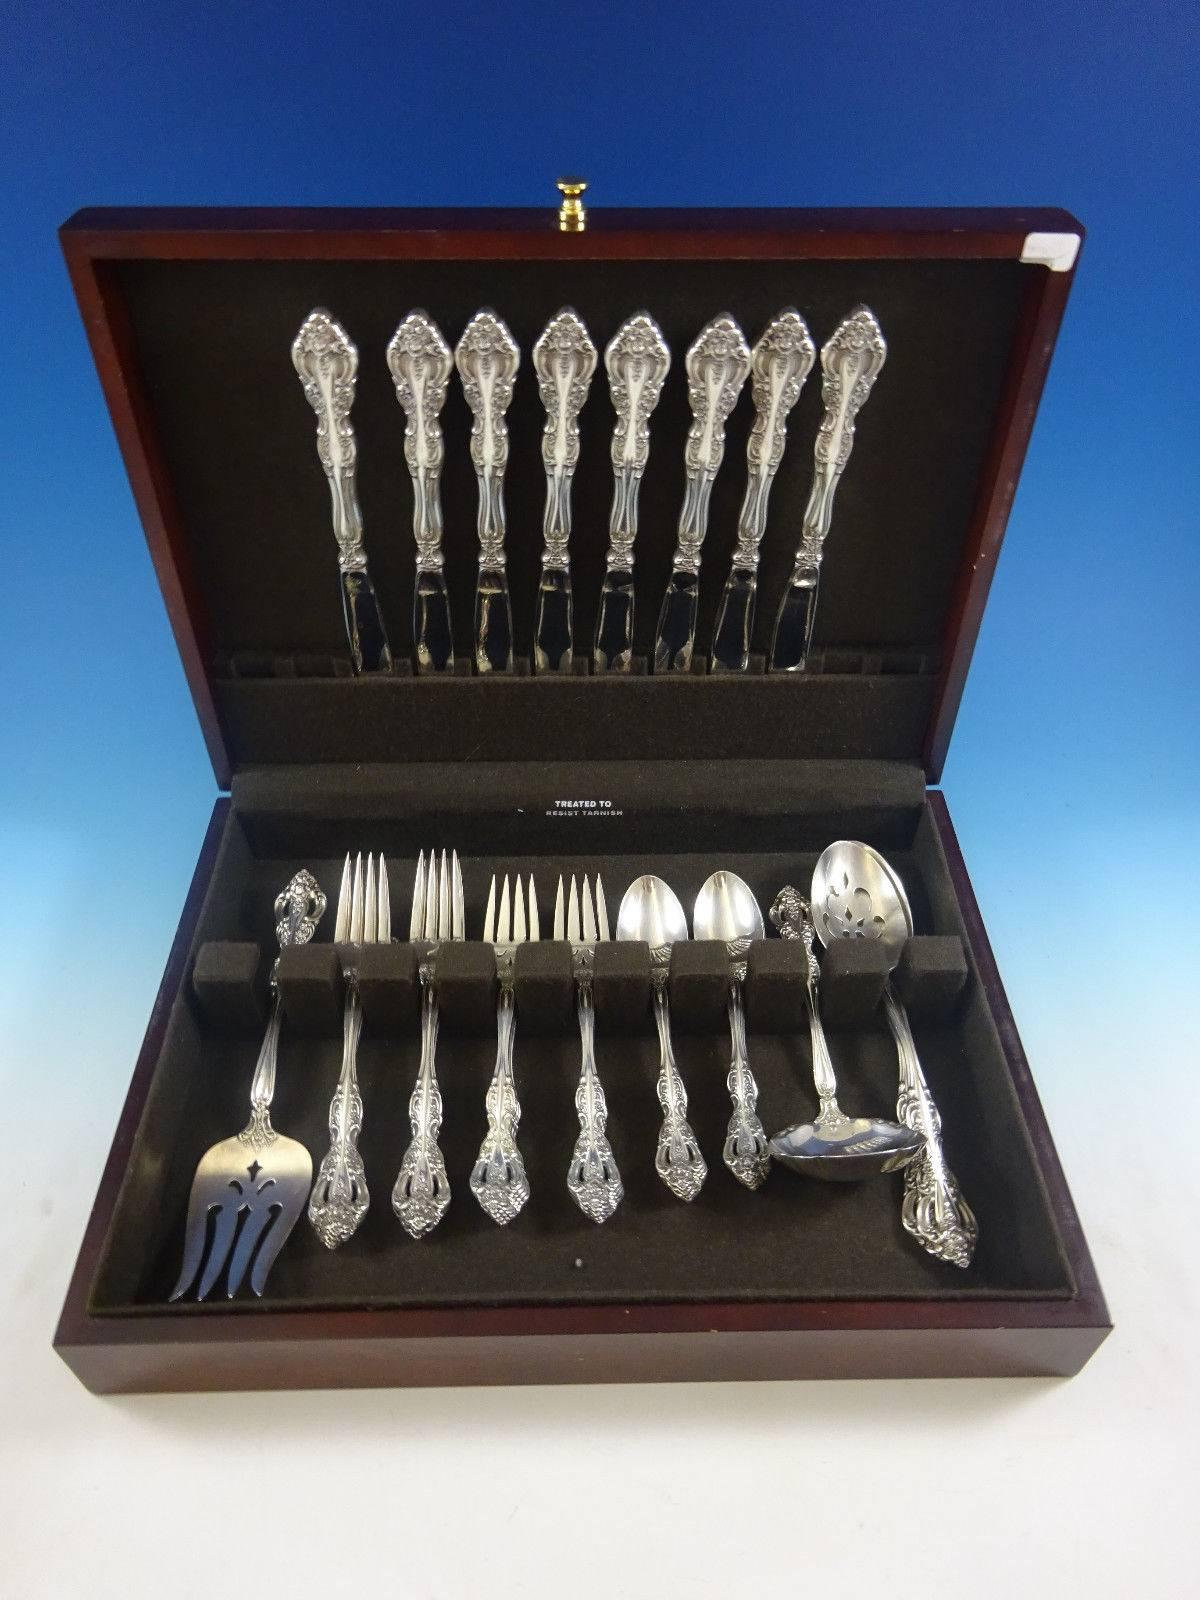 Beautiful Michelangelo by Oneida Sterling Silver flatware set, 36 pieces. This set includes:

Eight knives, 9